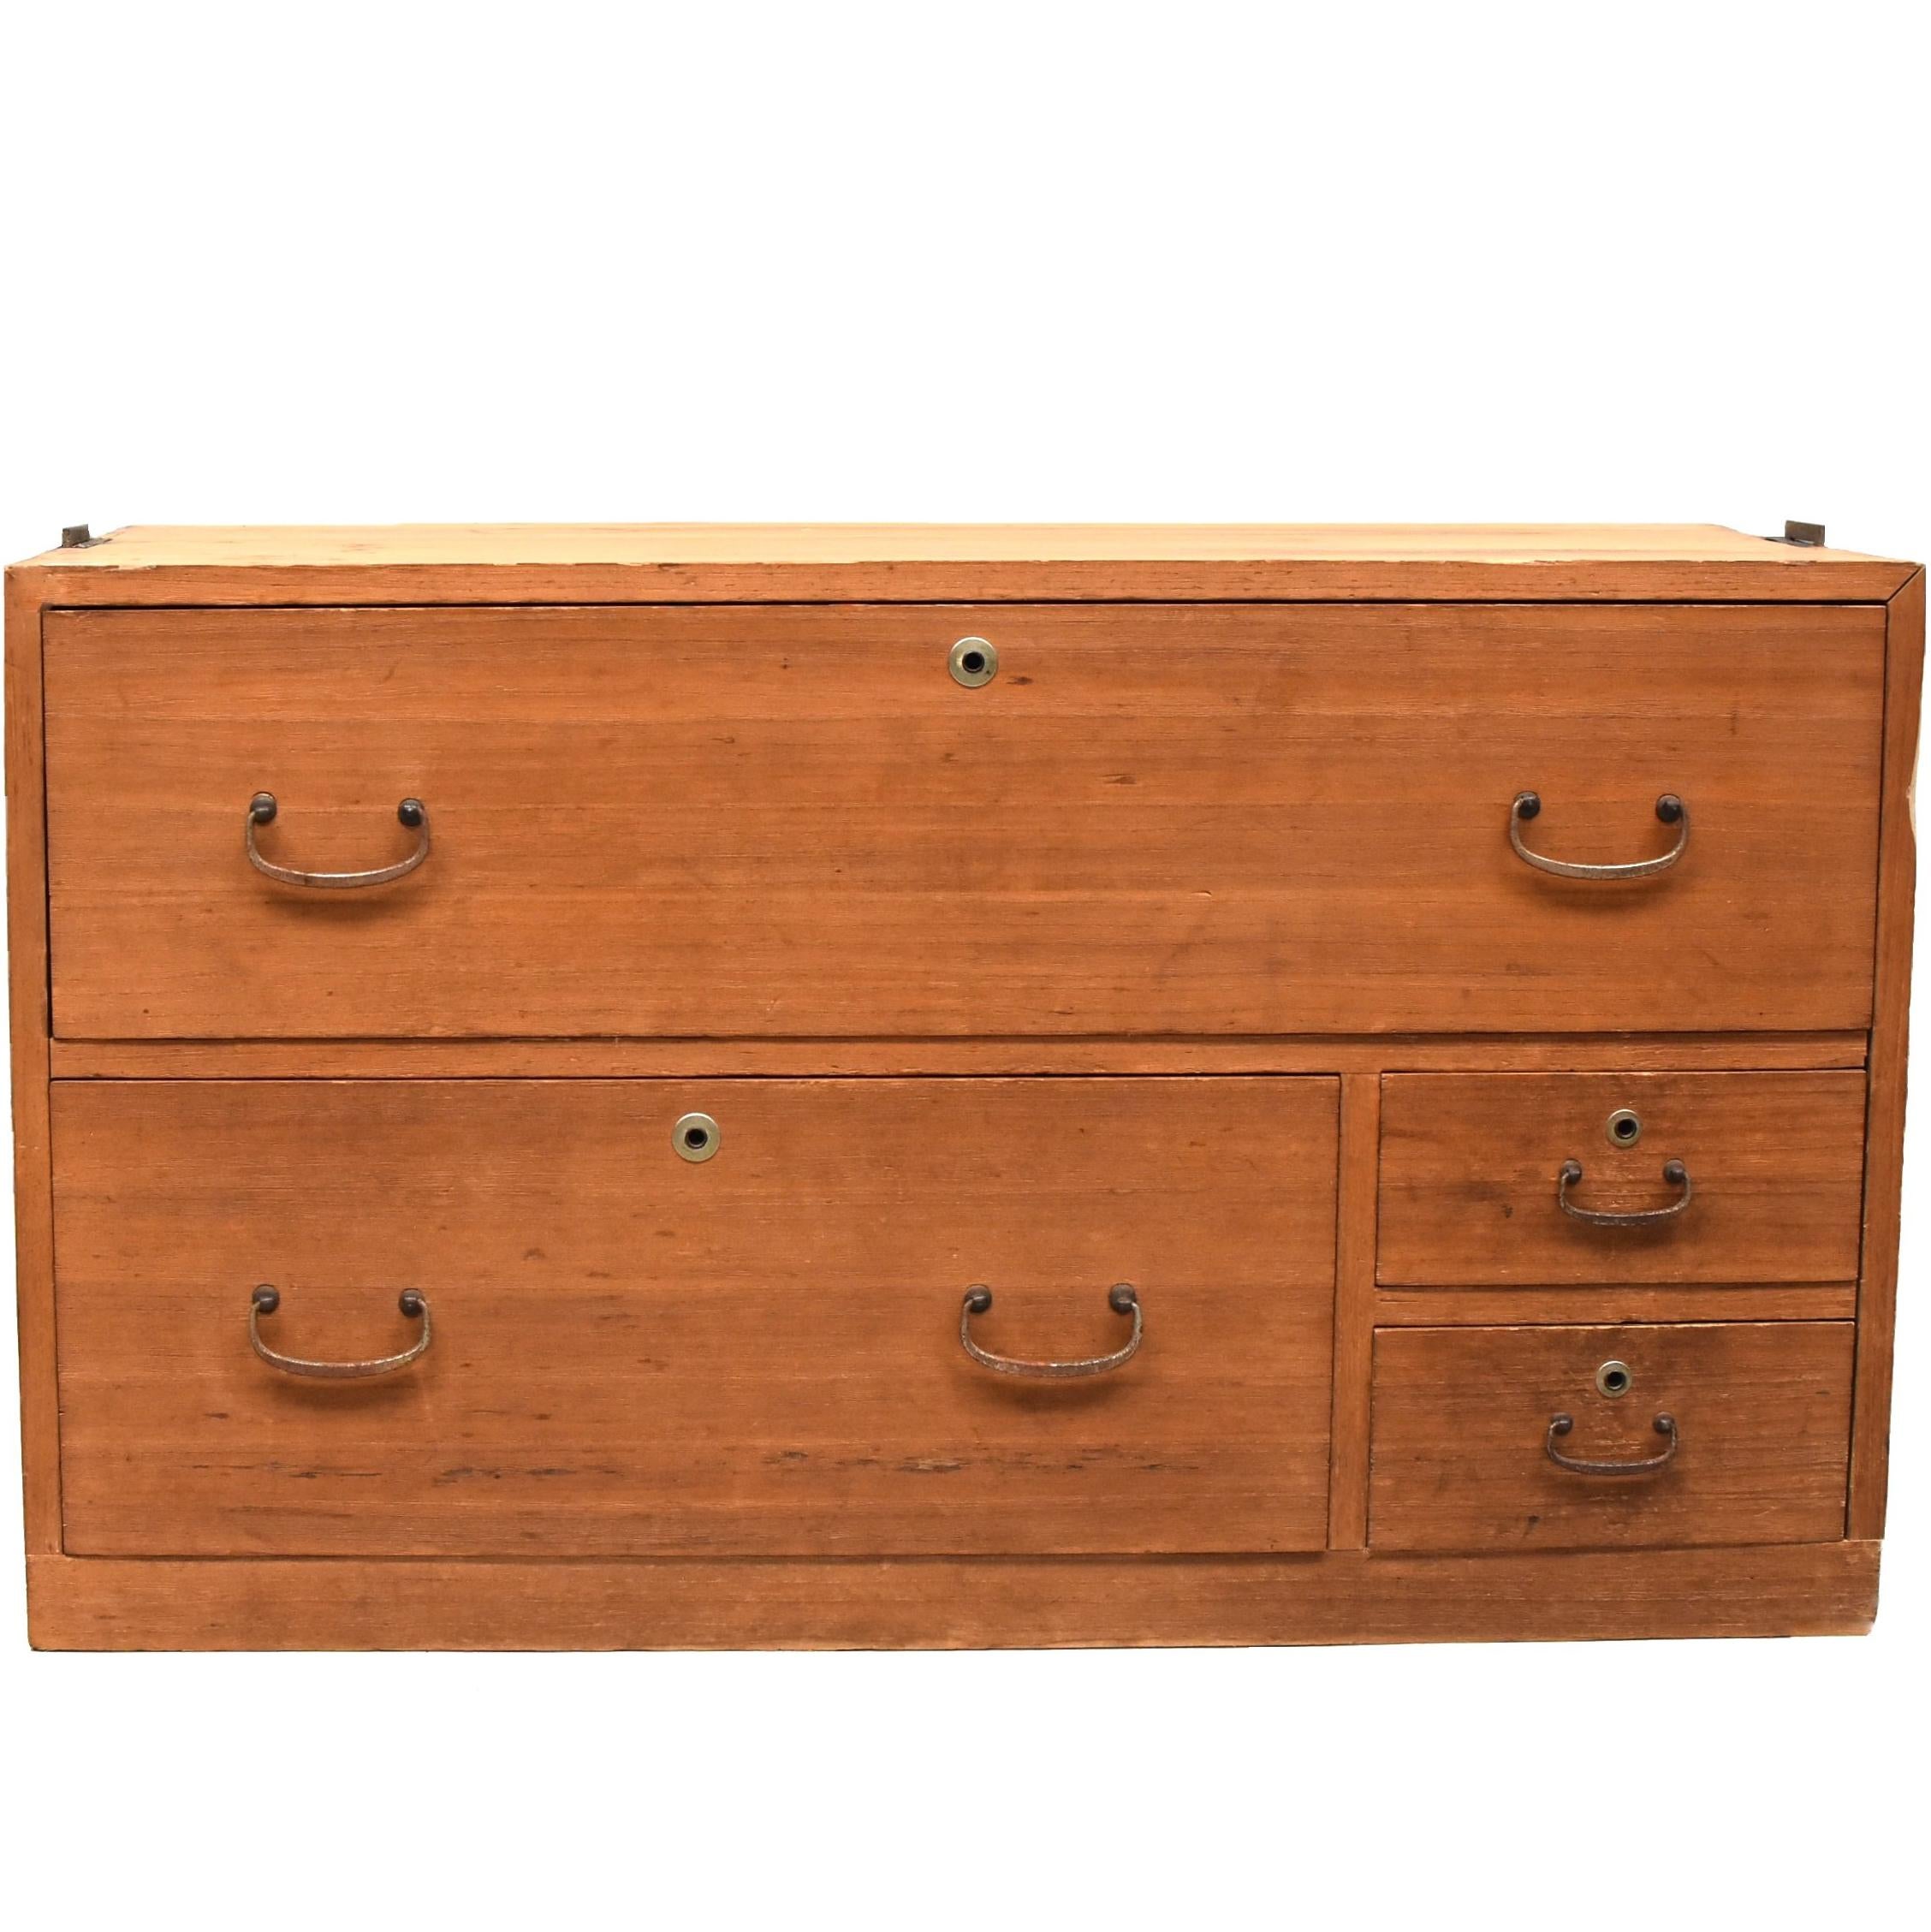 Low Four-Drawer Japanese Tansu Chest in Natural Finish